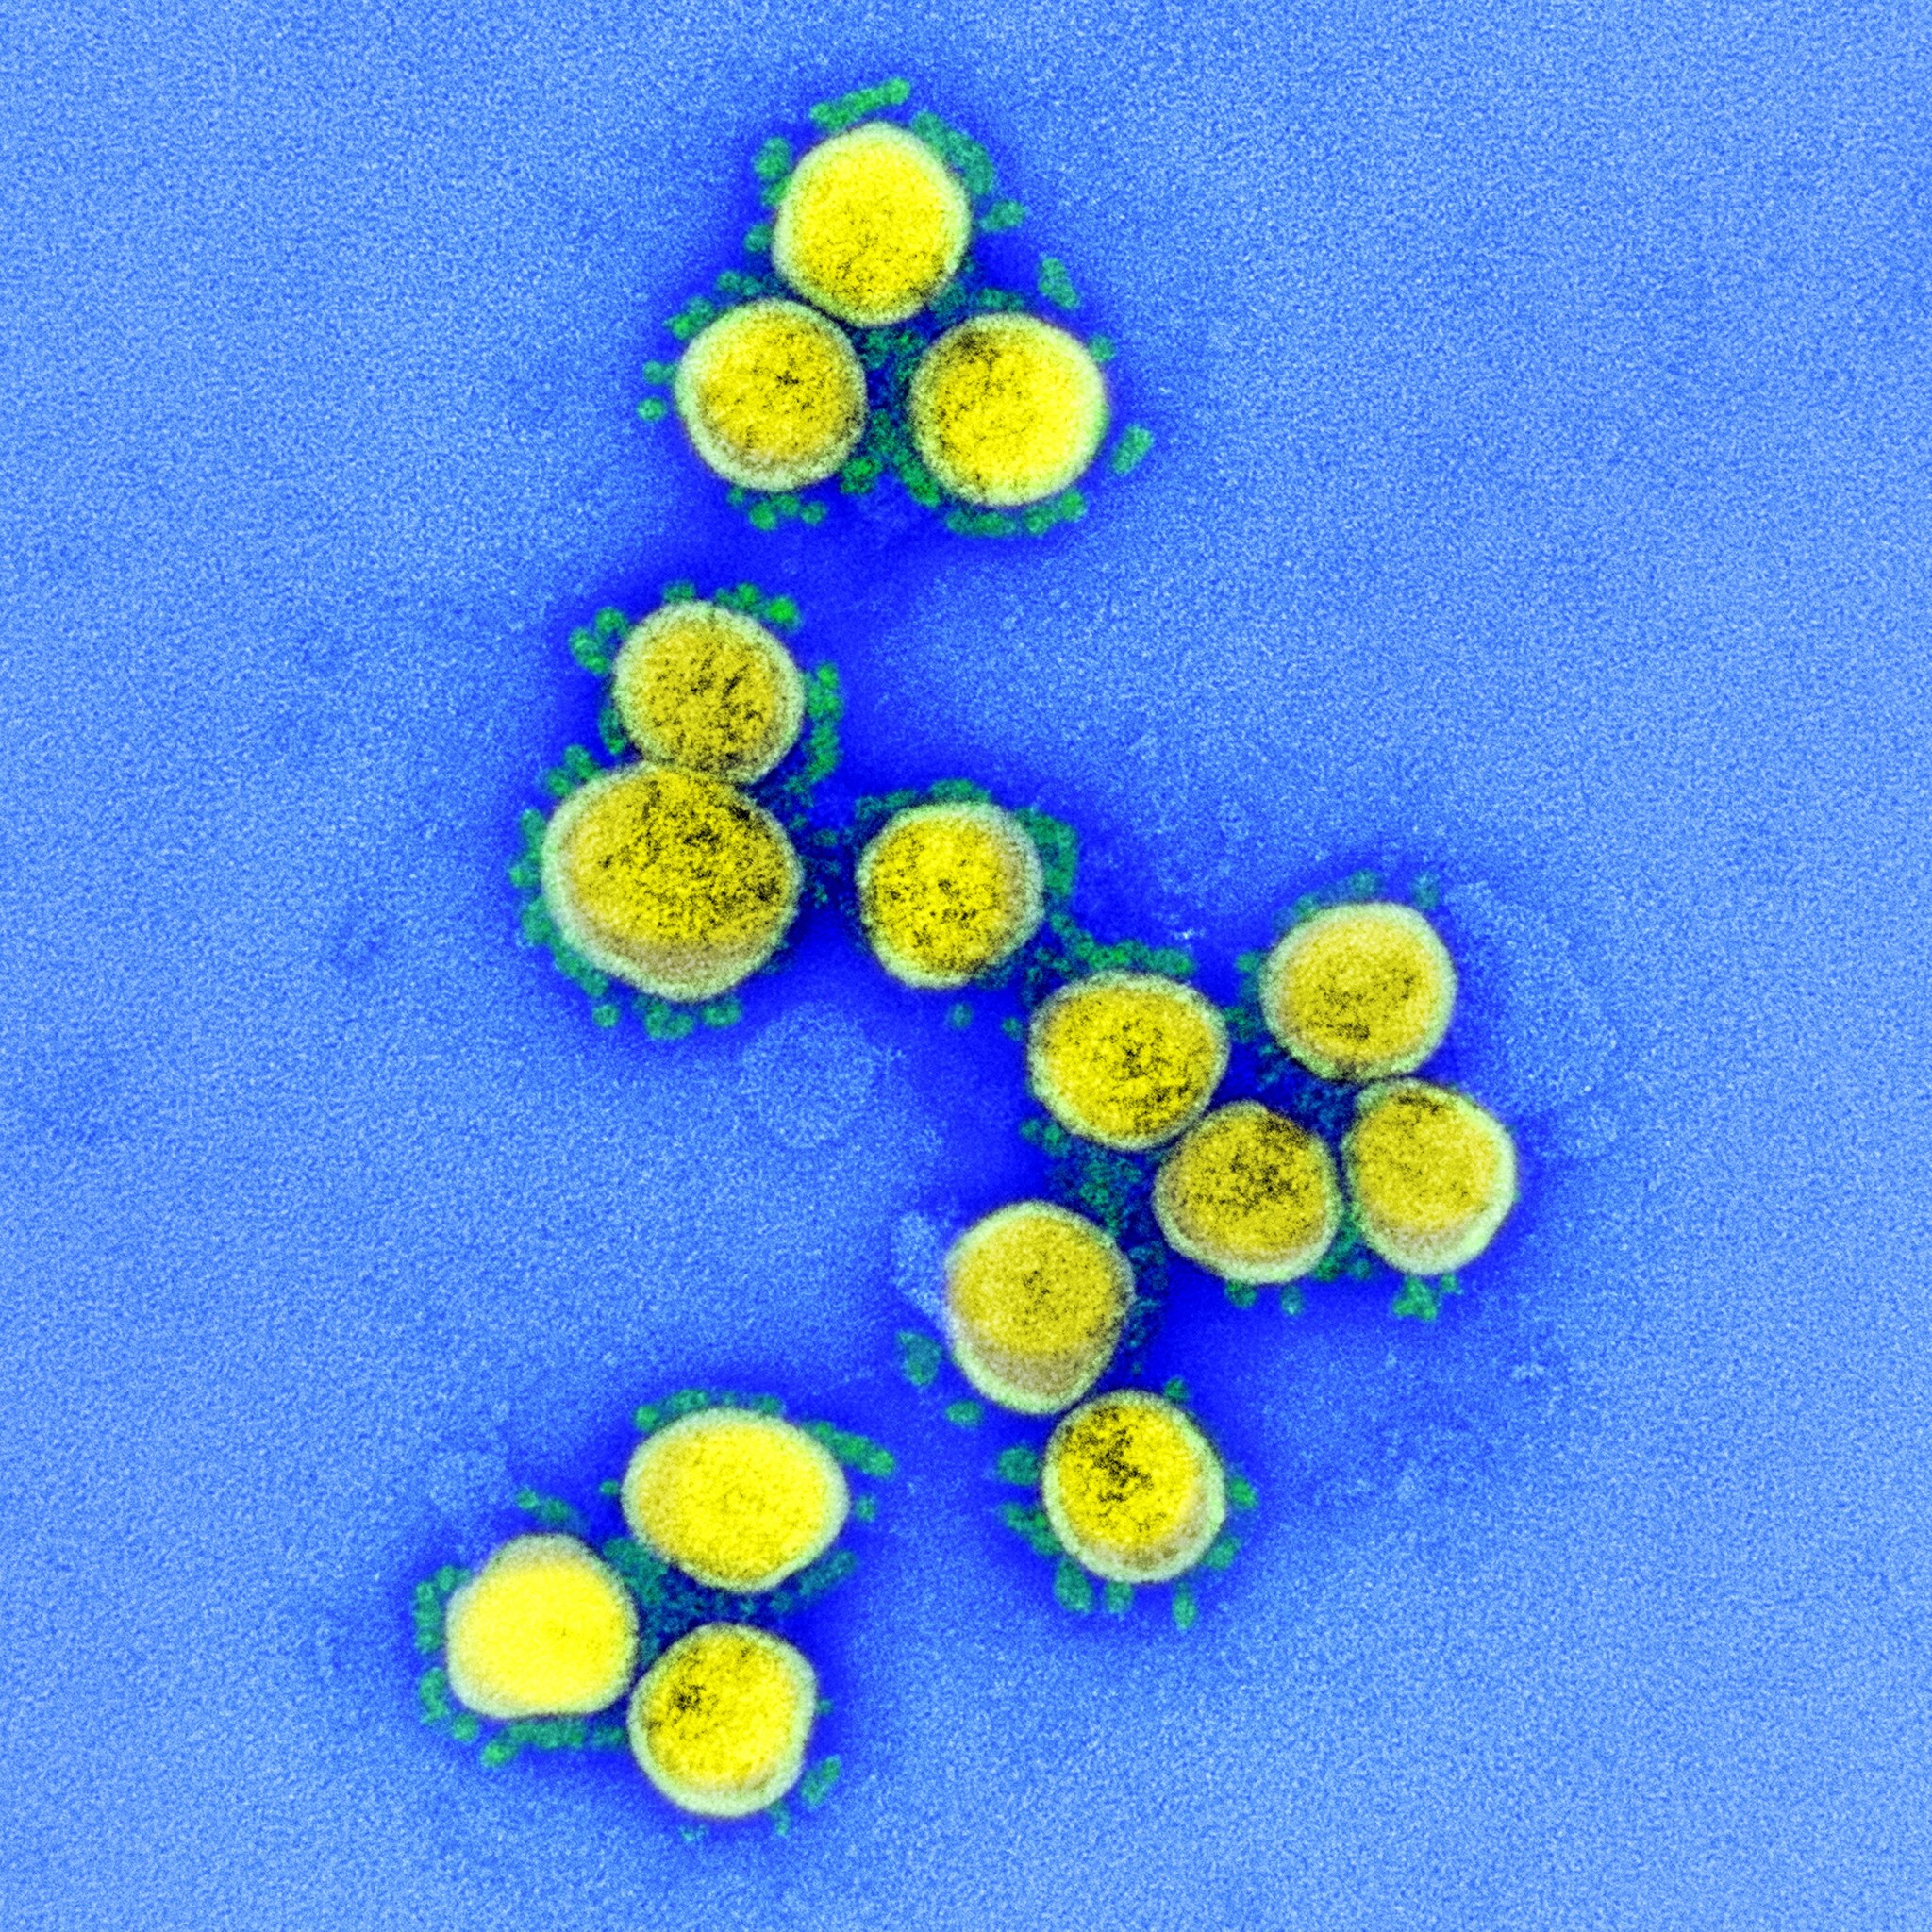 A transmission electron micrograph image of Sars-CoV-2 virus particles, isolated from a patient. Photo: EPA-EFE/NIAID/National Institutes of Health handout